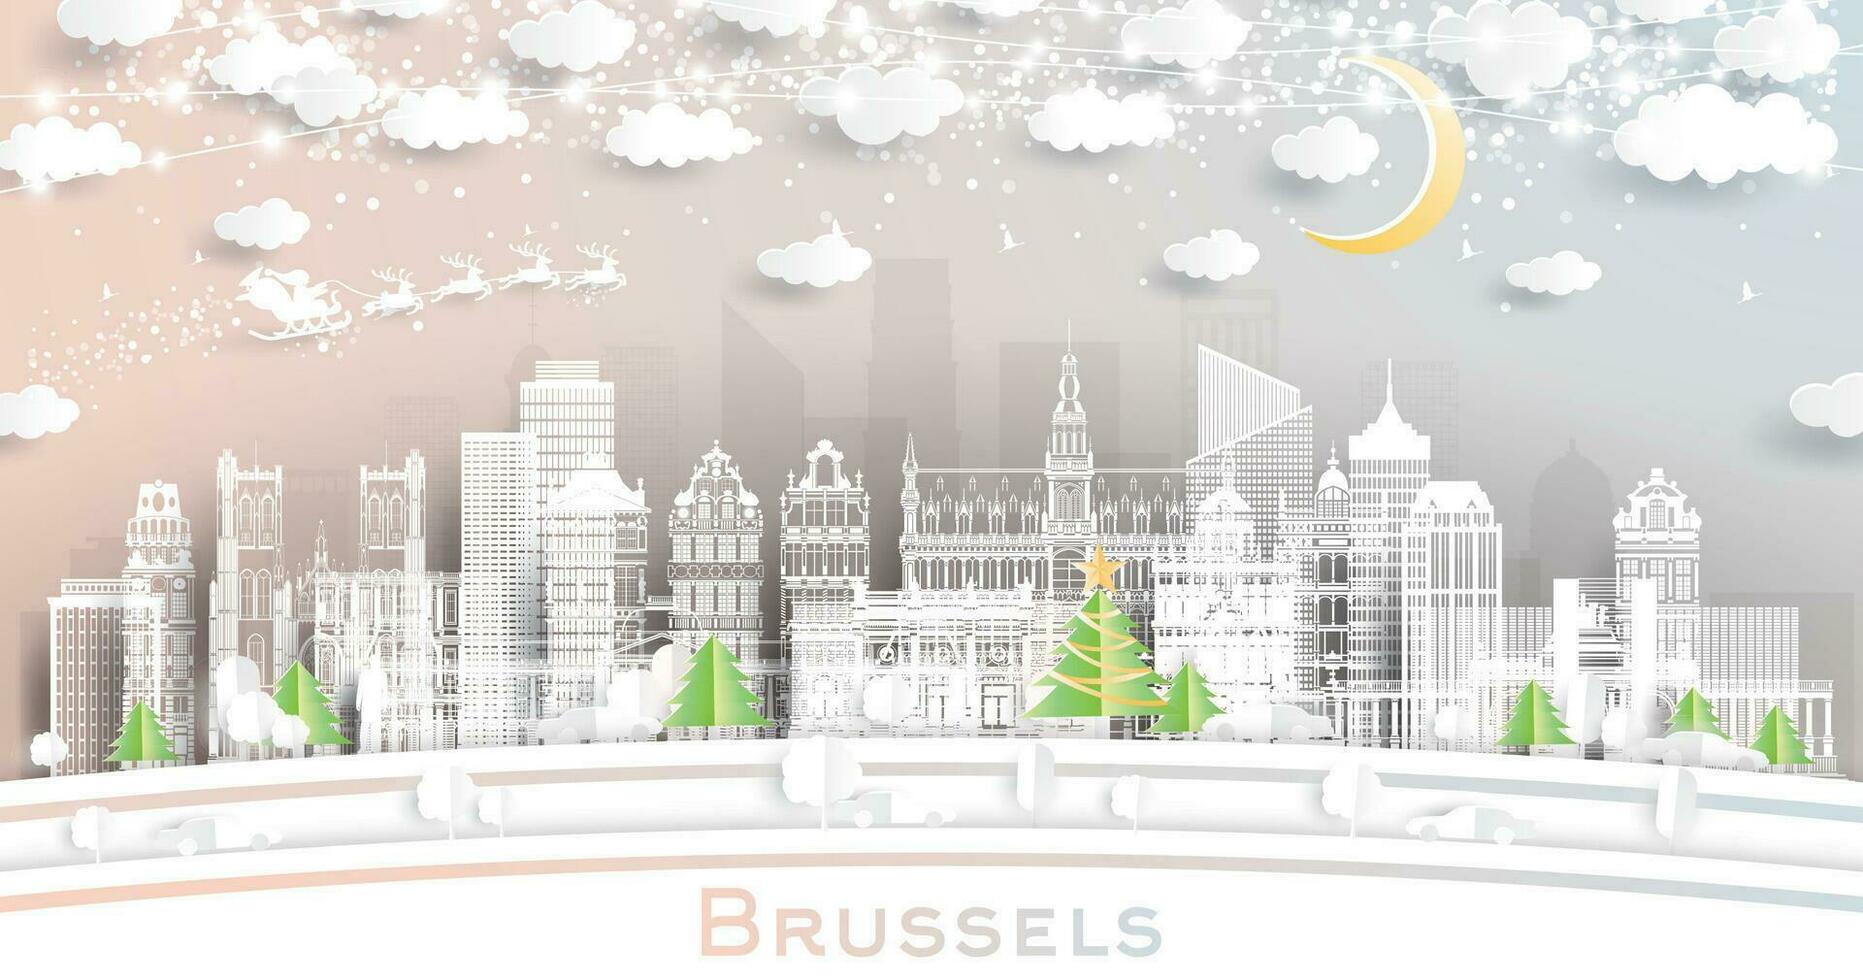 Brussels Belgium. Winter City Skyline in Paper Cut Style with Snowflakes, Moon and Neon Garland. Christmas and New Year Concept. Brussels Cityscape with Landmarks. vector